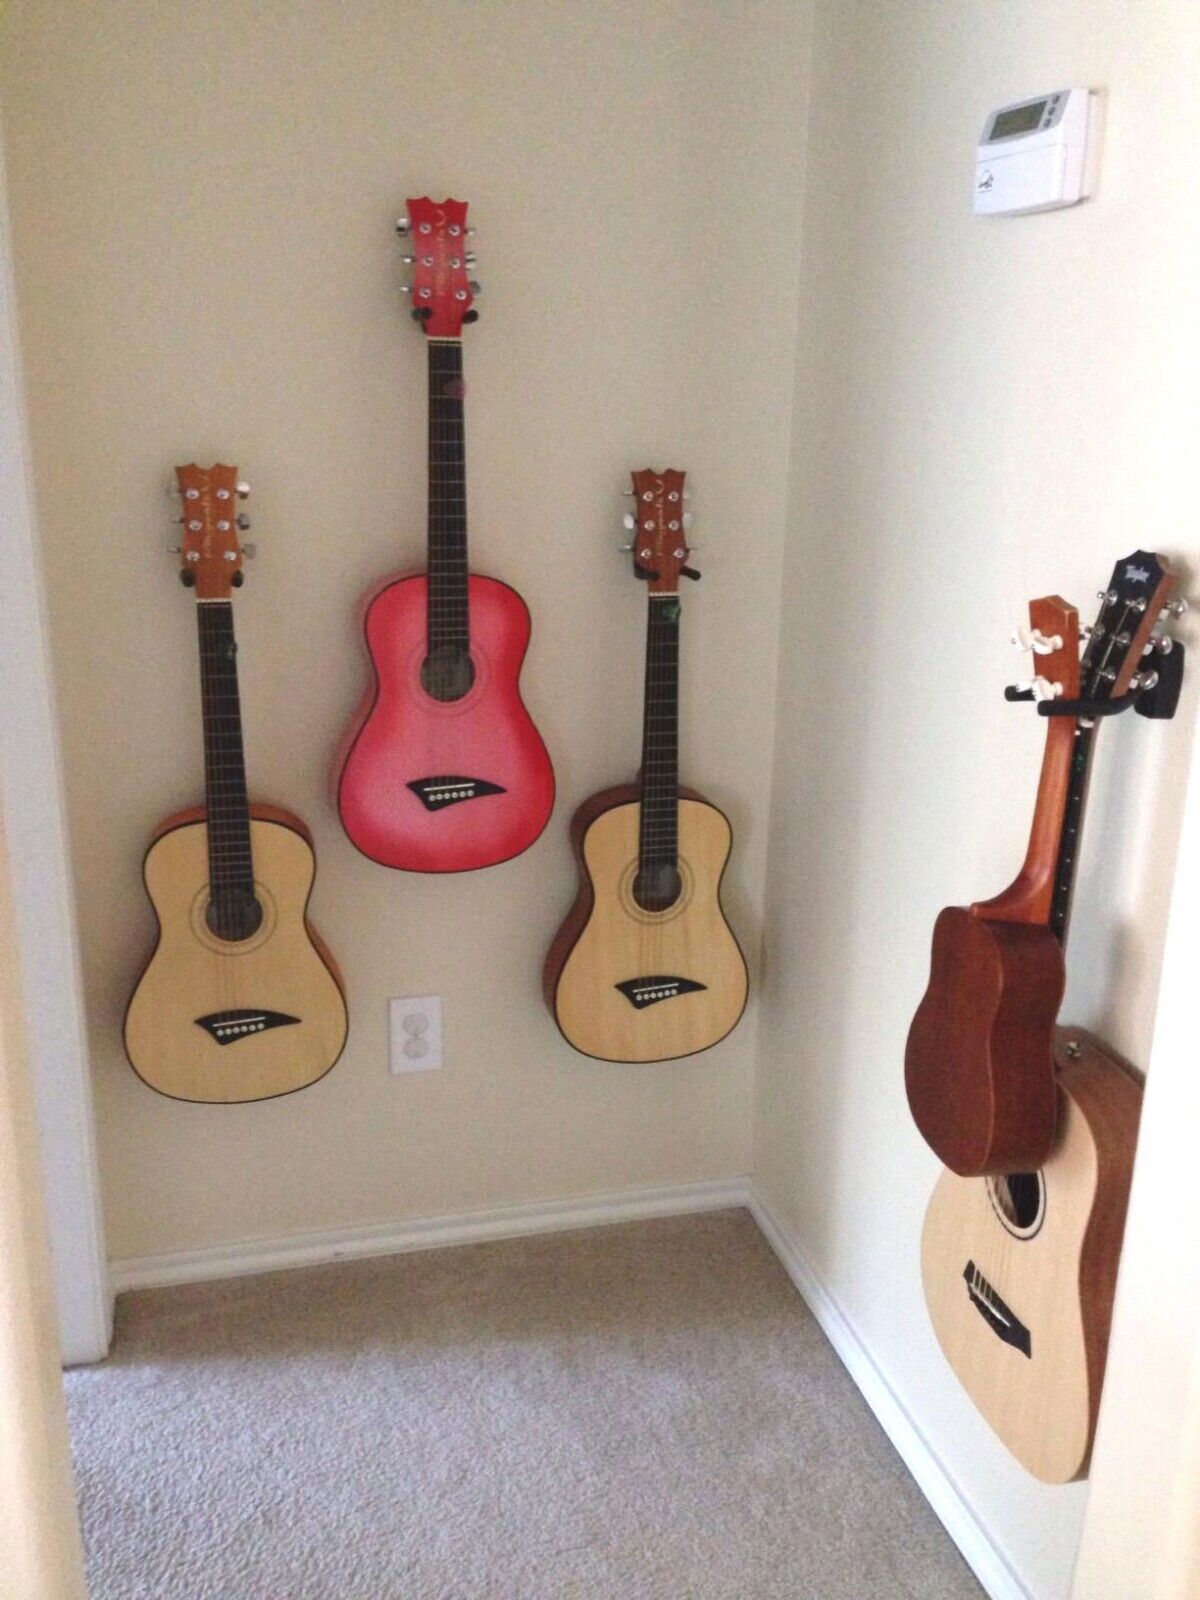 2-PACK Guitar Hanger Hook Holder Wall Mount Display Acoustic Electric. GRJ-Q2 Top Stage Grak1-Q2 - фотография #6